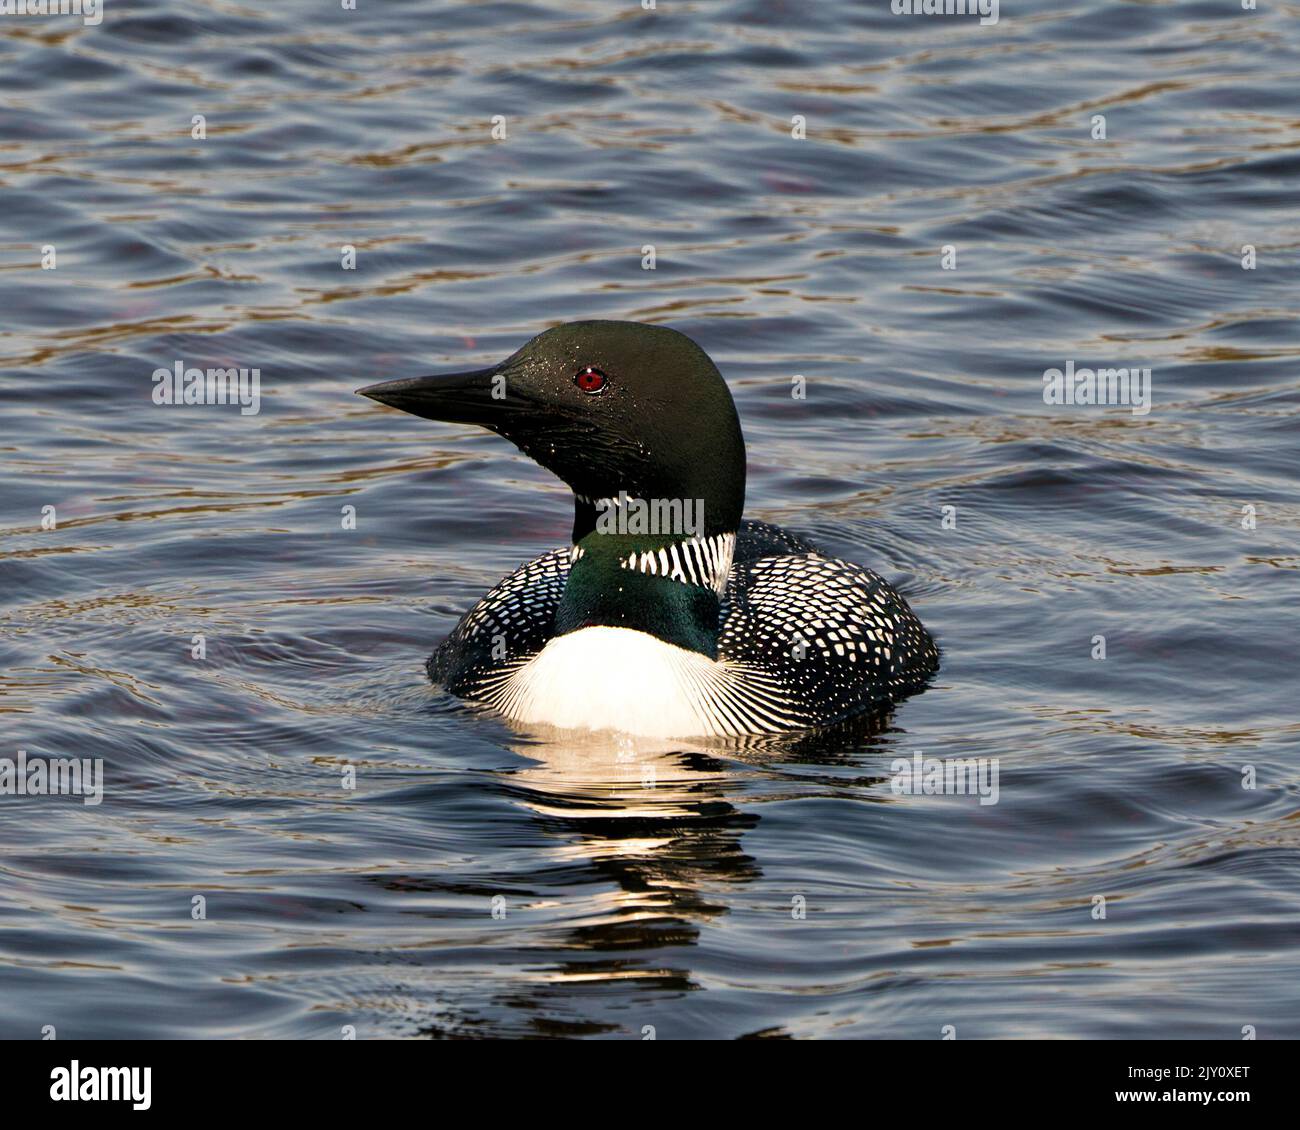 Loon close-up profile front view swimming in the lake in its environment and habitat, displaying red eye, white and black feather plumage. Stock Photo